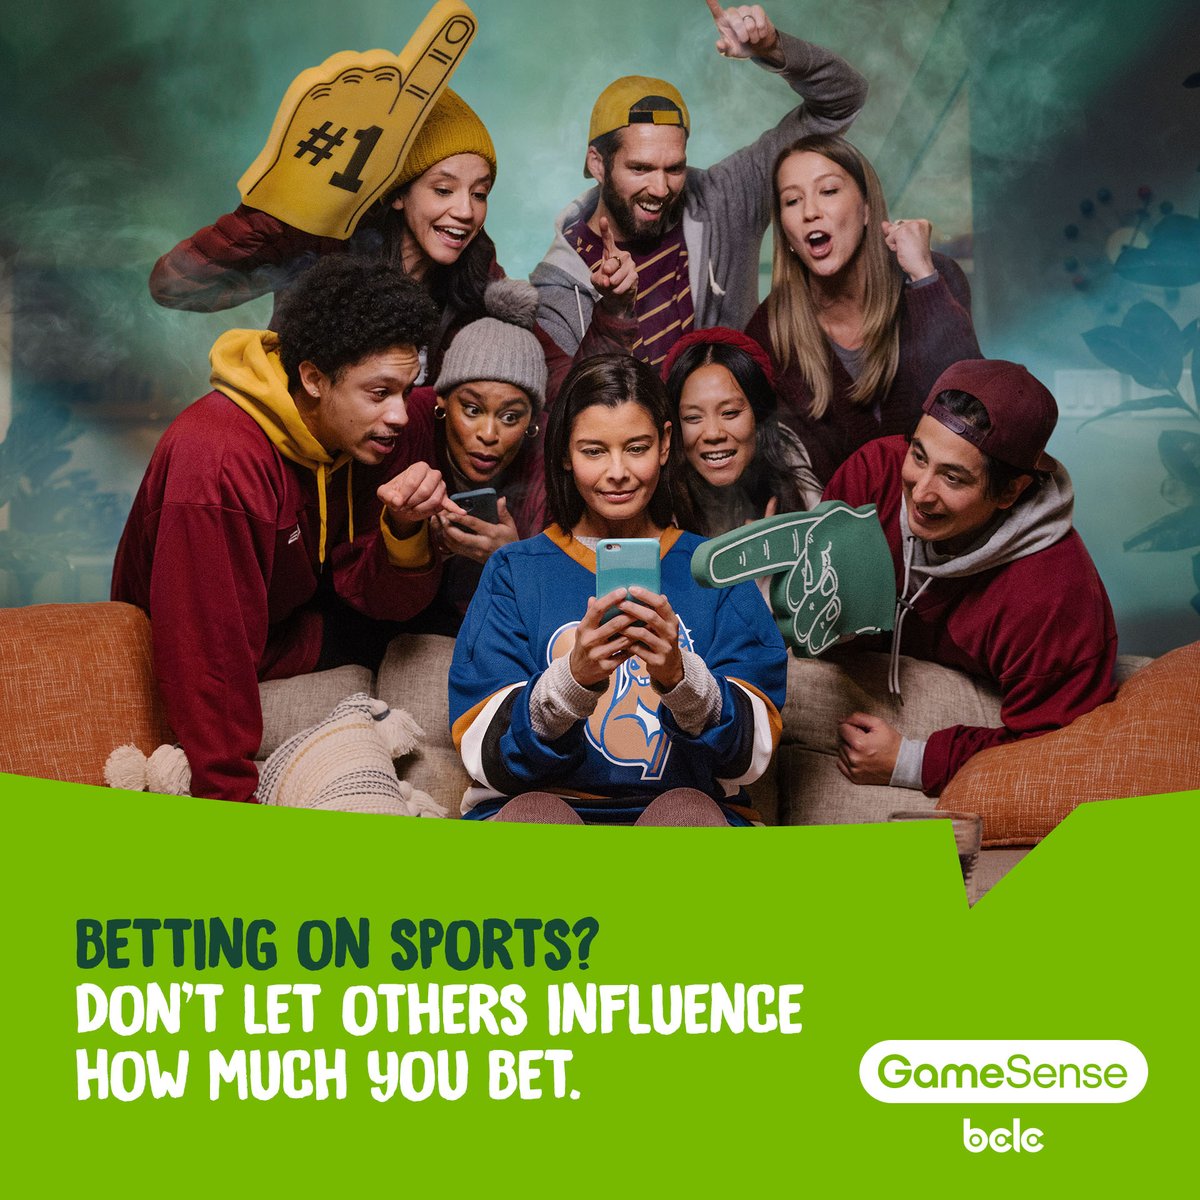 Sports come with pressure. Betting on sports can too. Set a budget you're comfortable with and stick to it. 

Learn more: gamesense.com/games/sports-b…